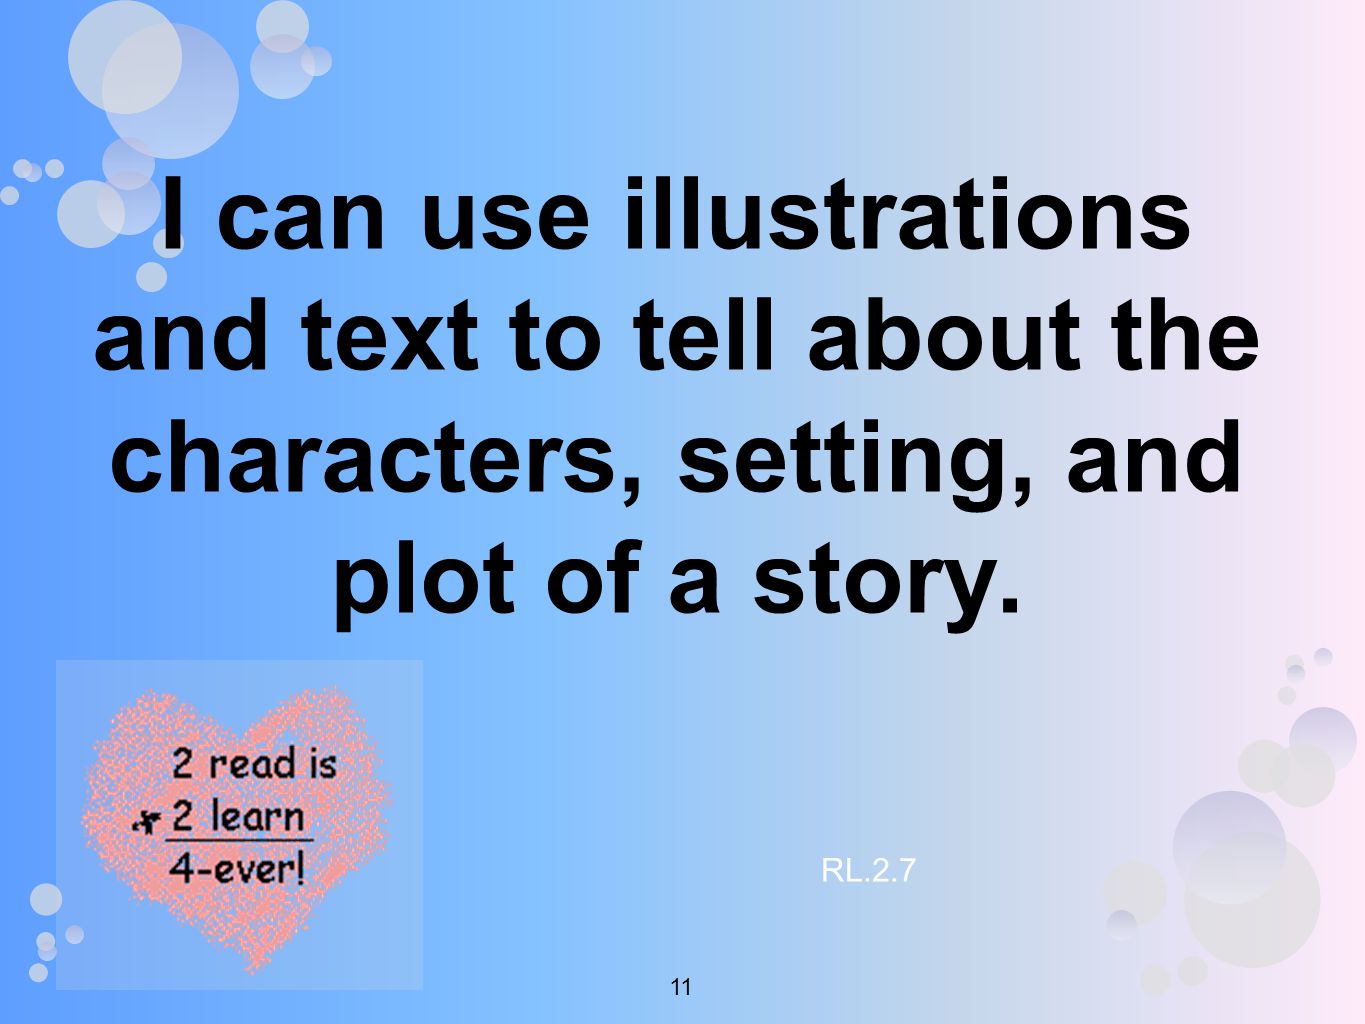 I can use illustrations and text to tell about the characters, setting, and plot of a story.